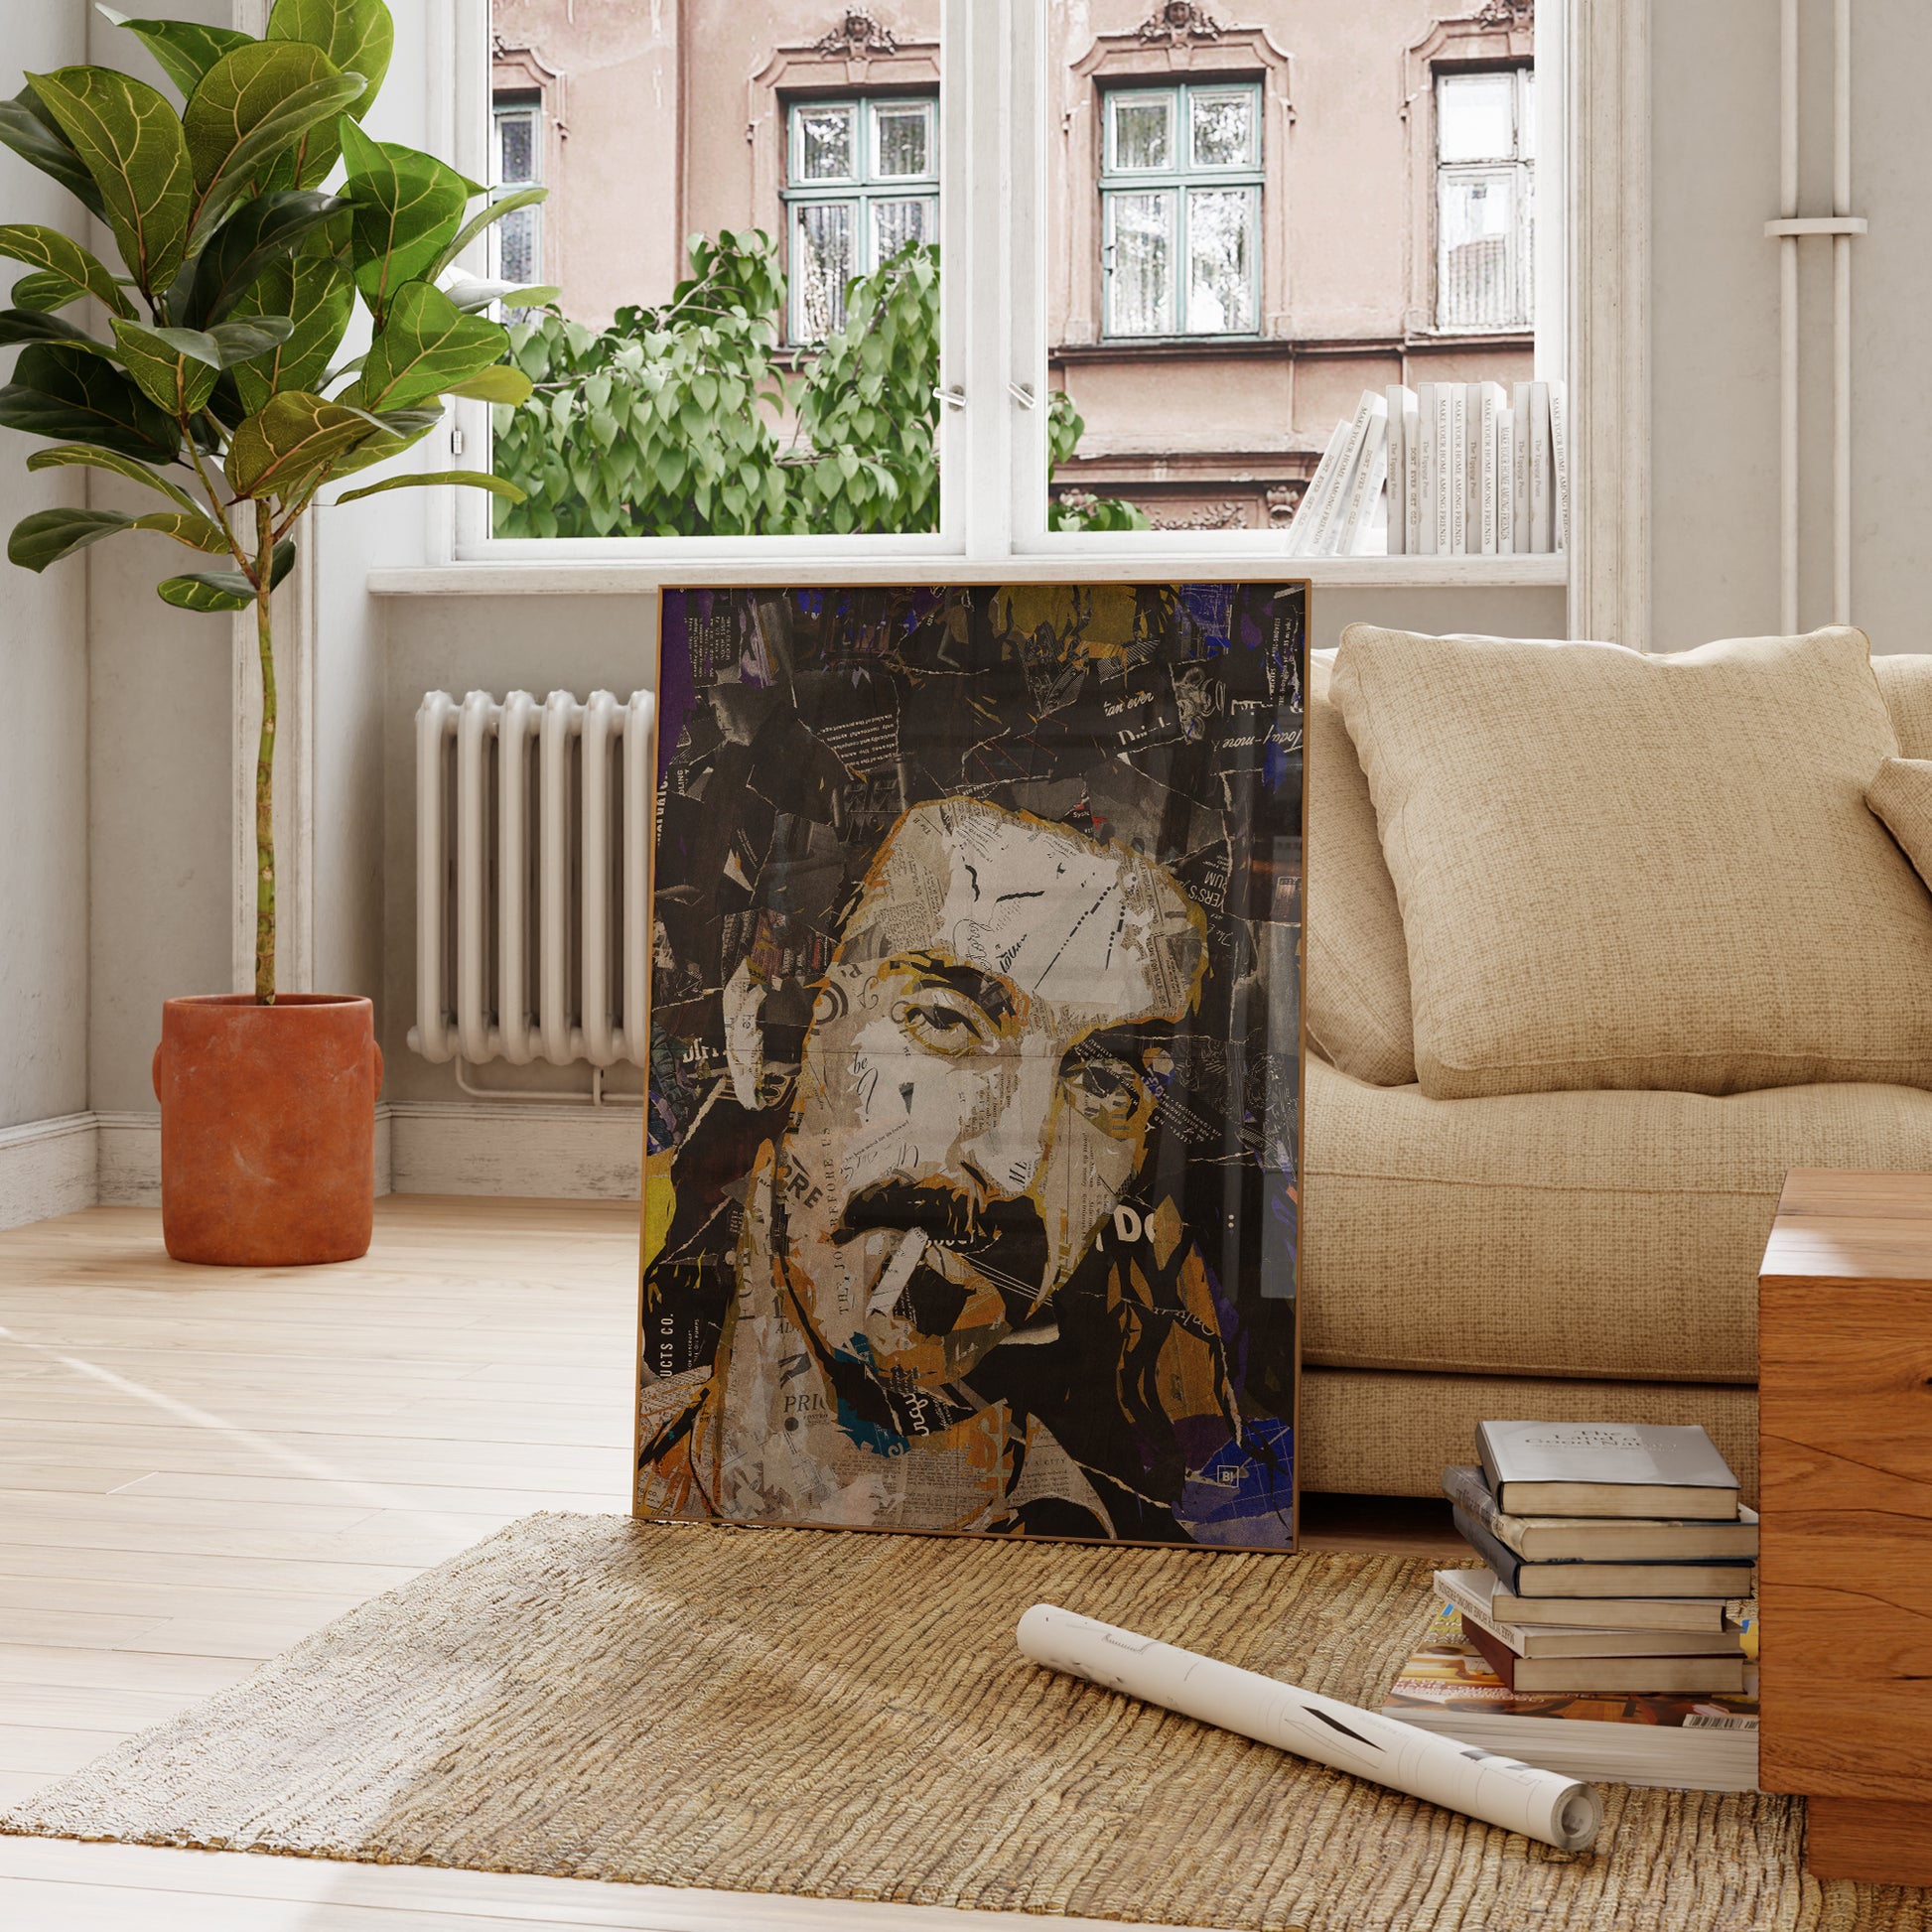 Be inspired by our iconic collage portrait art print of Frank Zappa. This artwork was printed using the giclée process on archival acid-free paper and is presented in a French living room, capturing its timeless beauty in every detail.